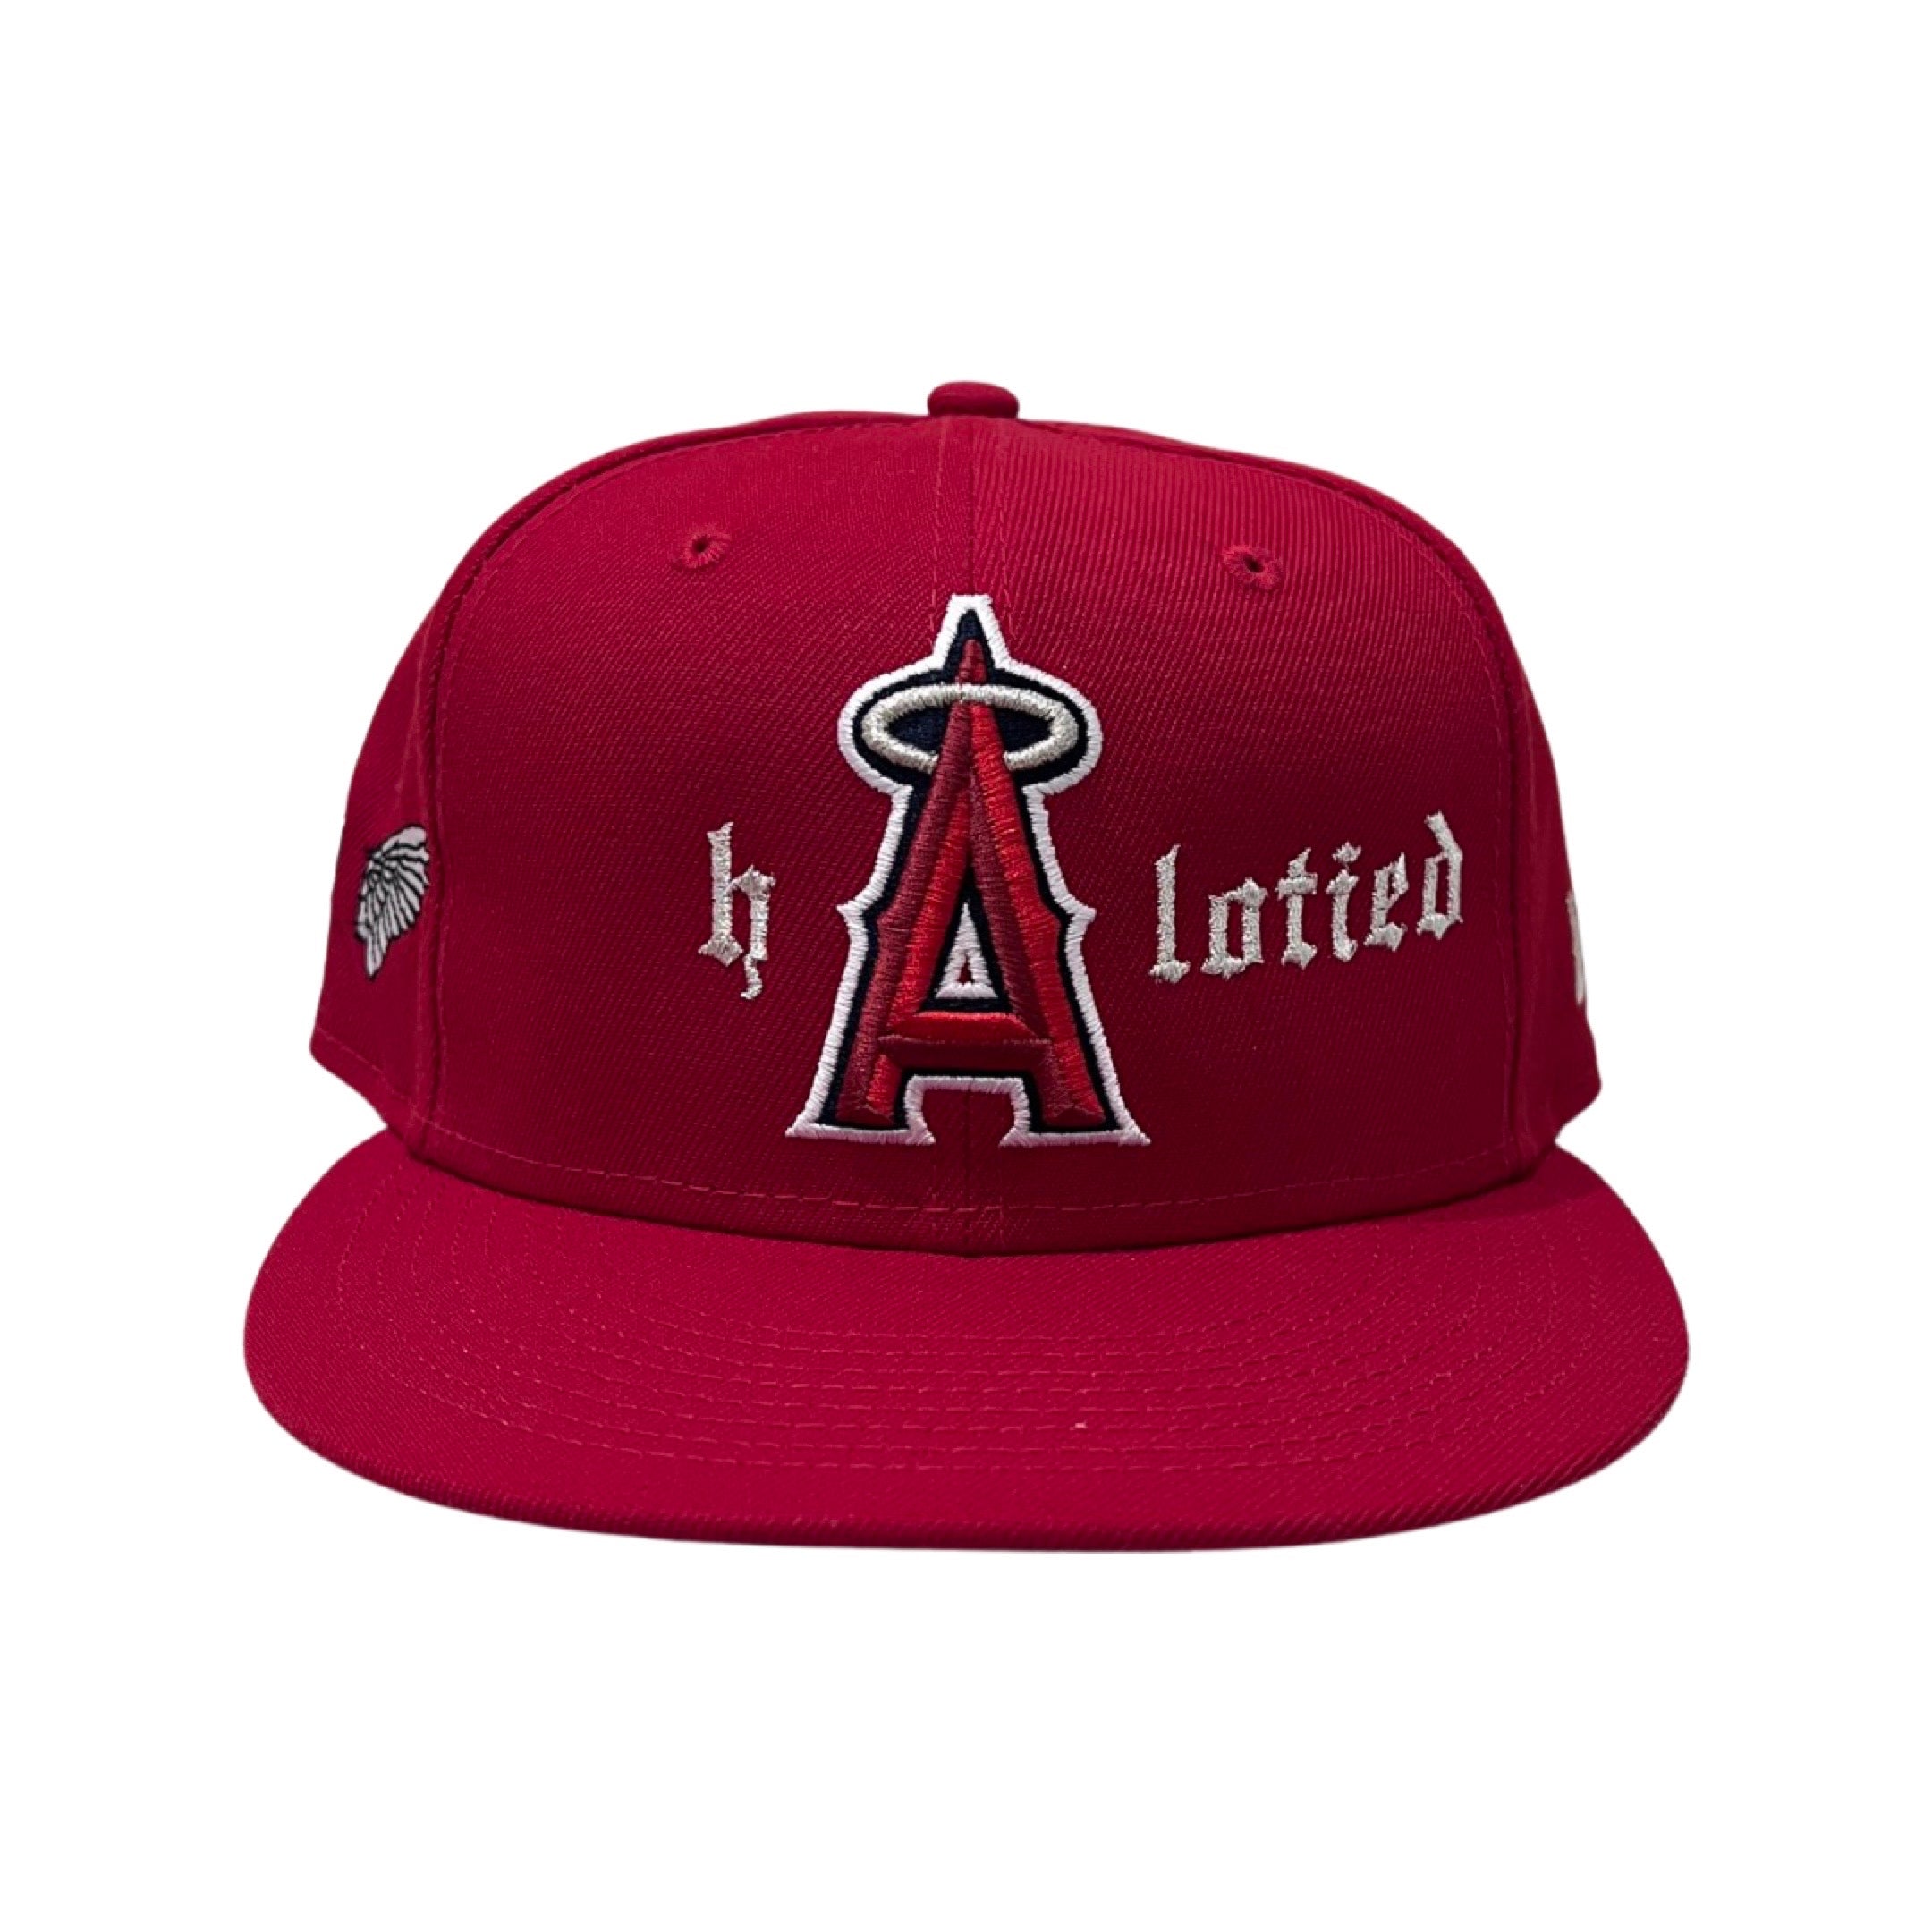 Atlanta A Trucker Cap Baseball Hat With Embroidered Halo 